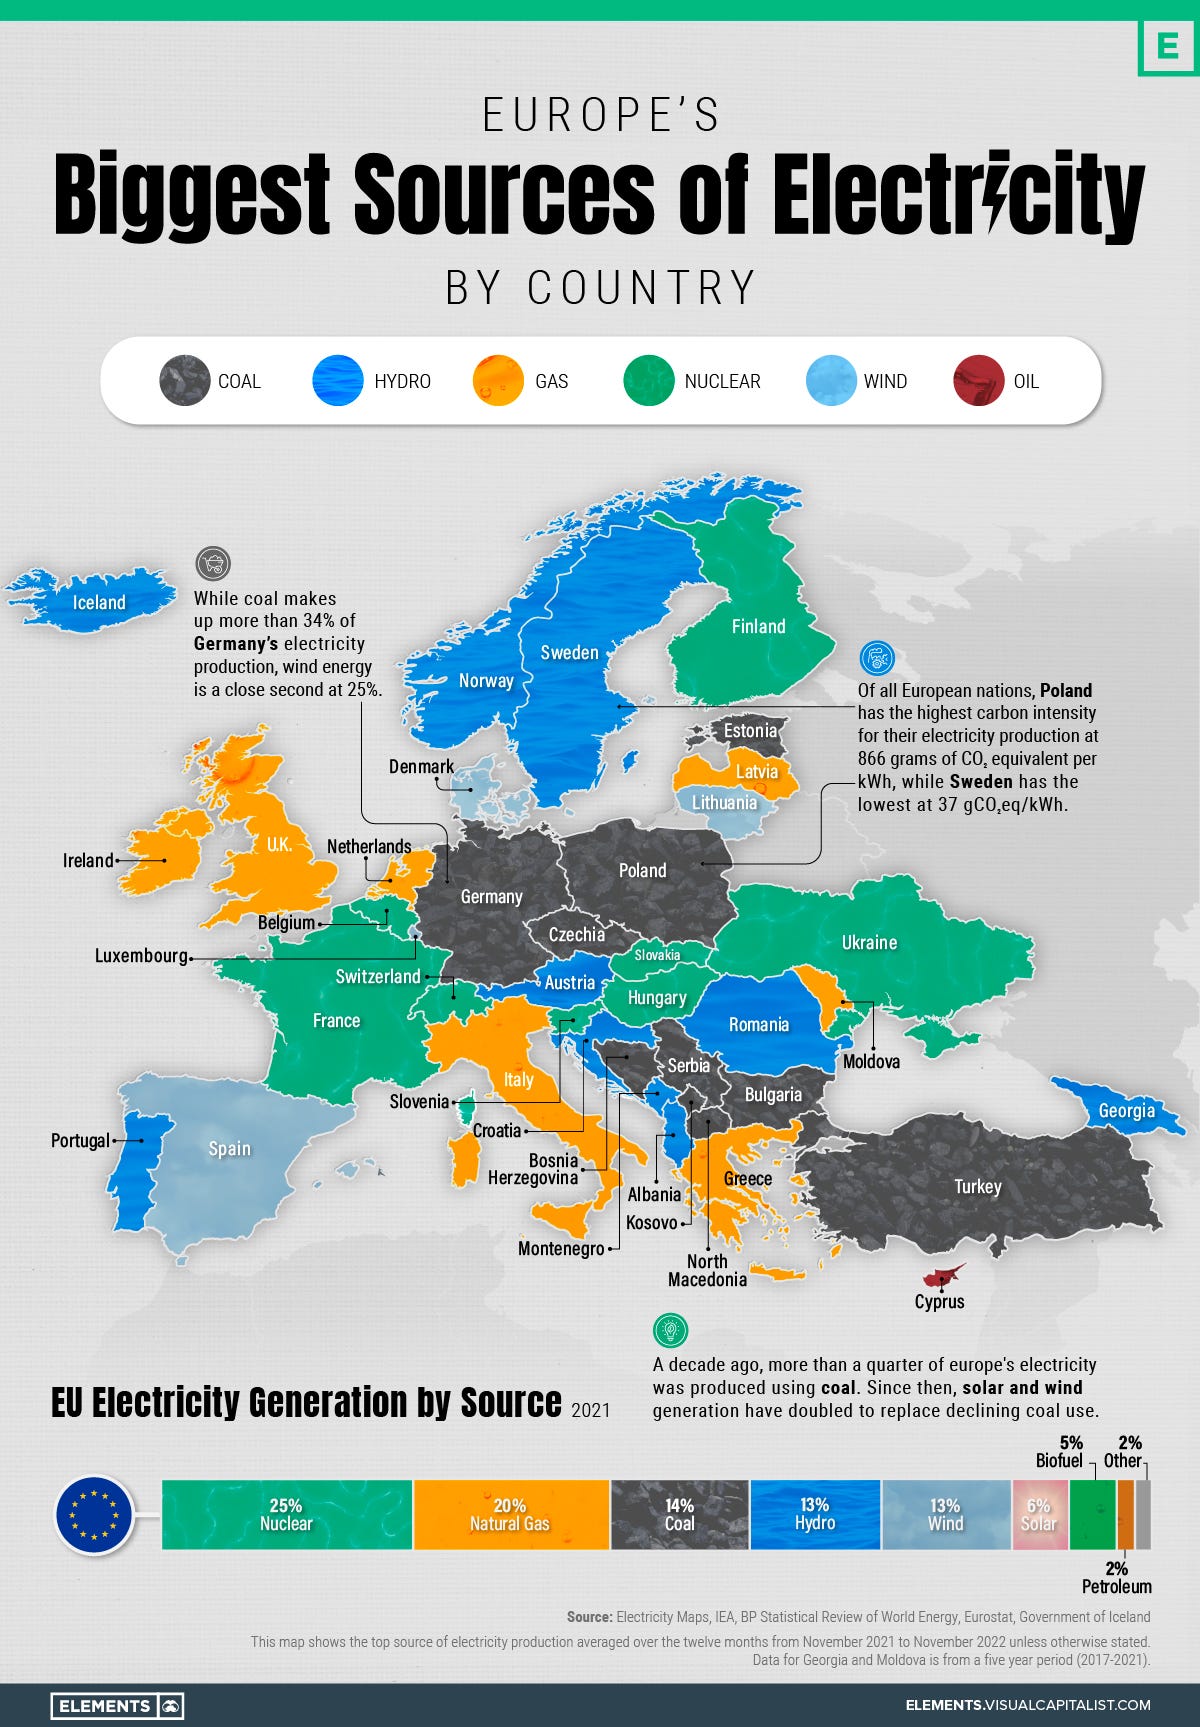 Map of Europe with countries colored according to their biggest sources of electricity generation